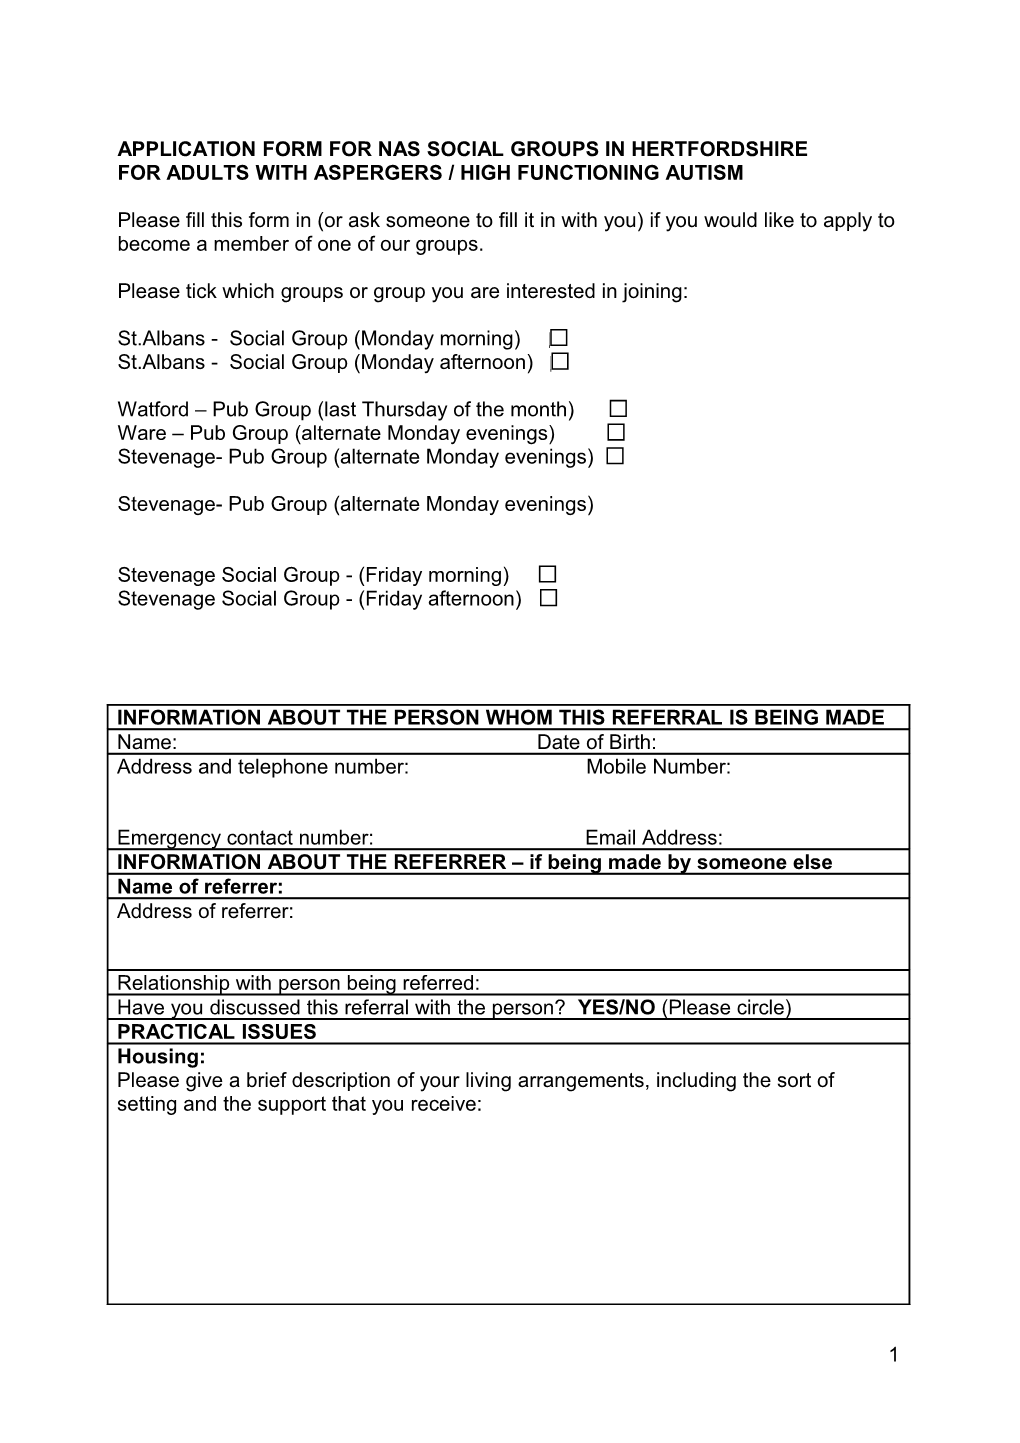 Application from for Social Group for Adults with Asperges / High Functioning Autism